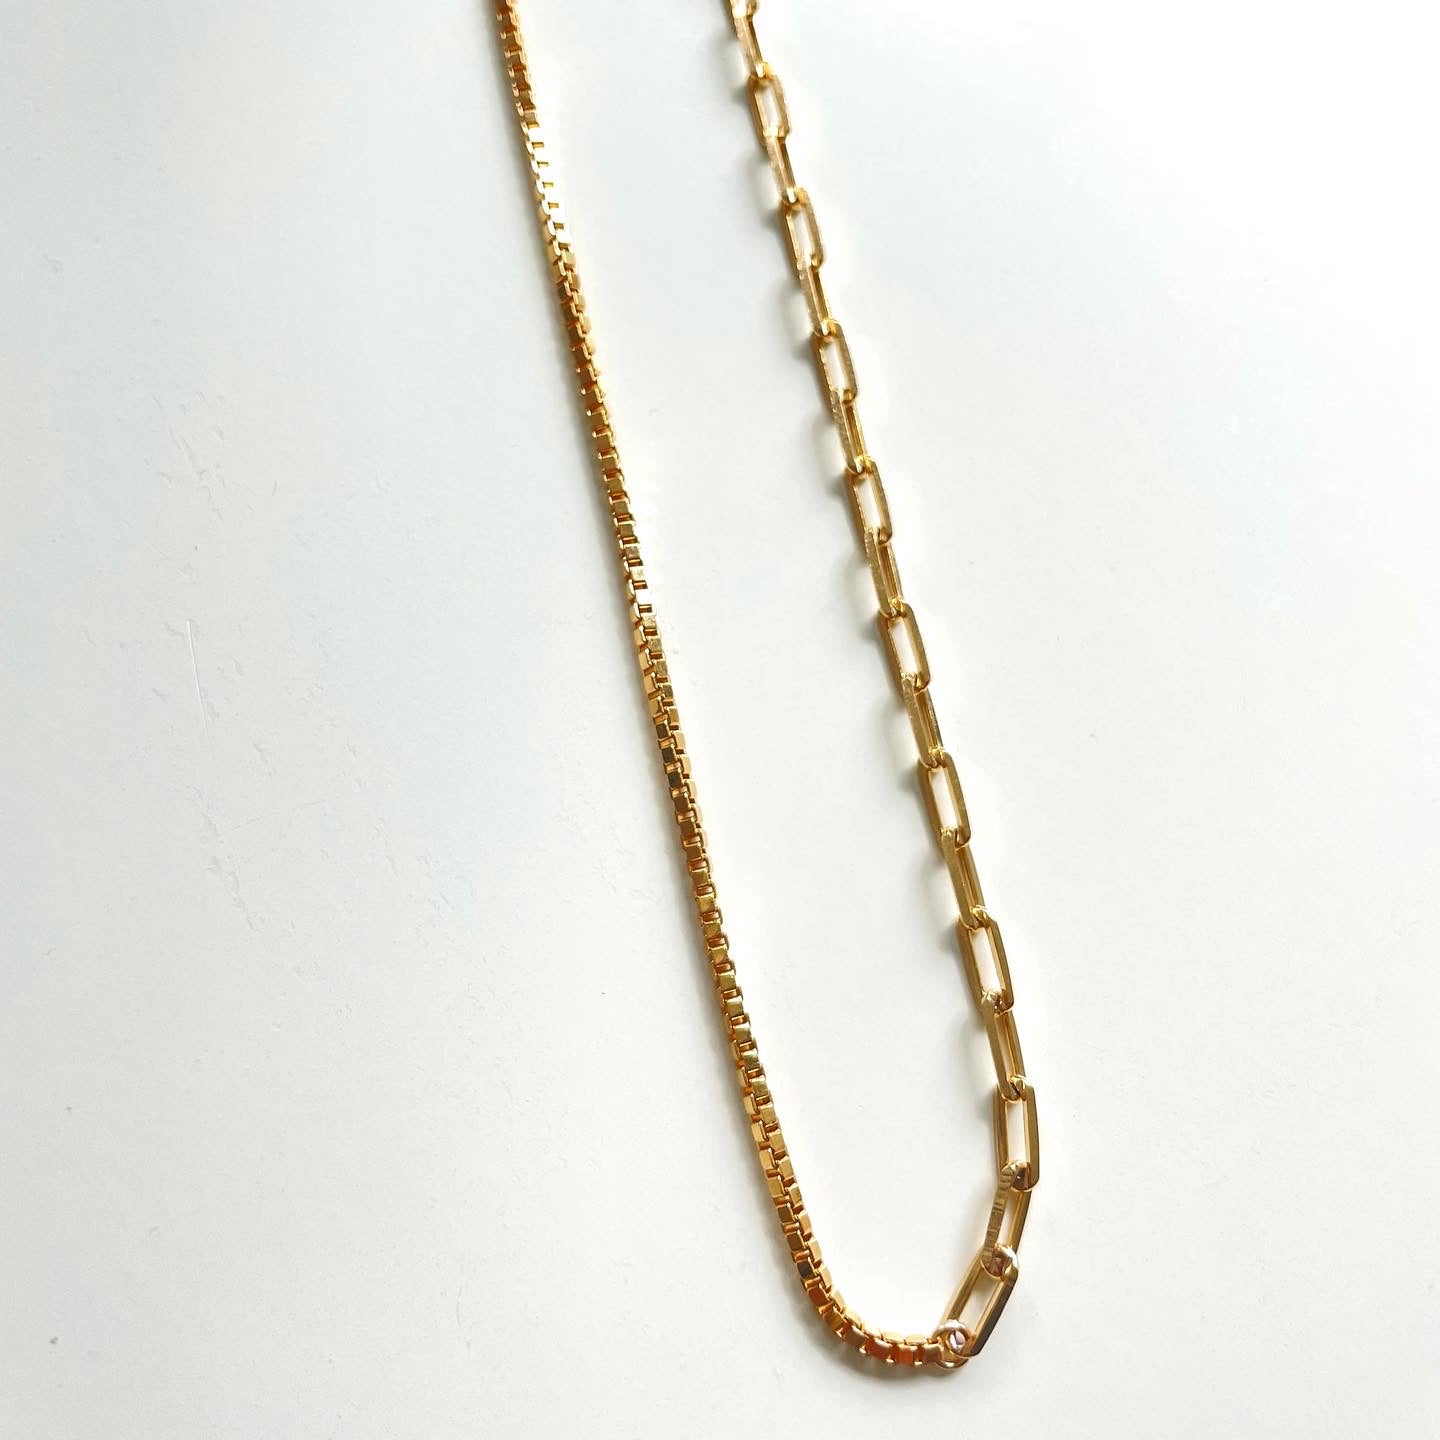 Stitch'd 1/2 and 1/2 Gold Necklace